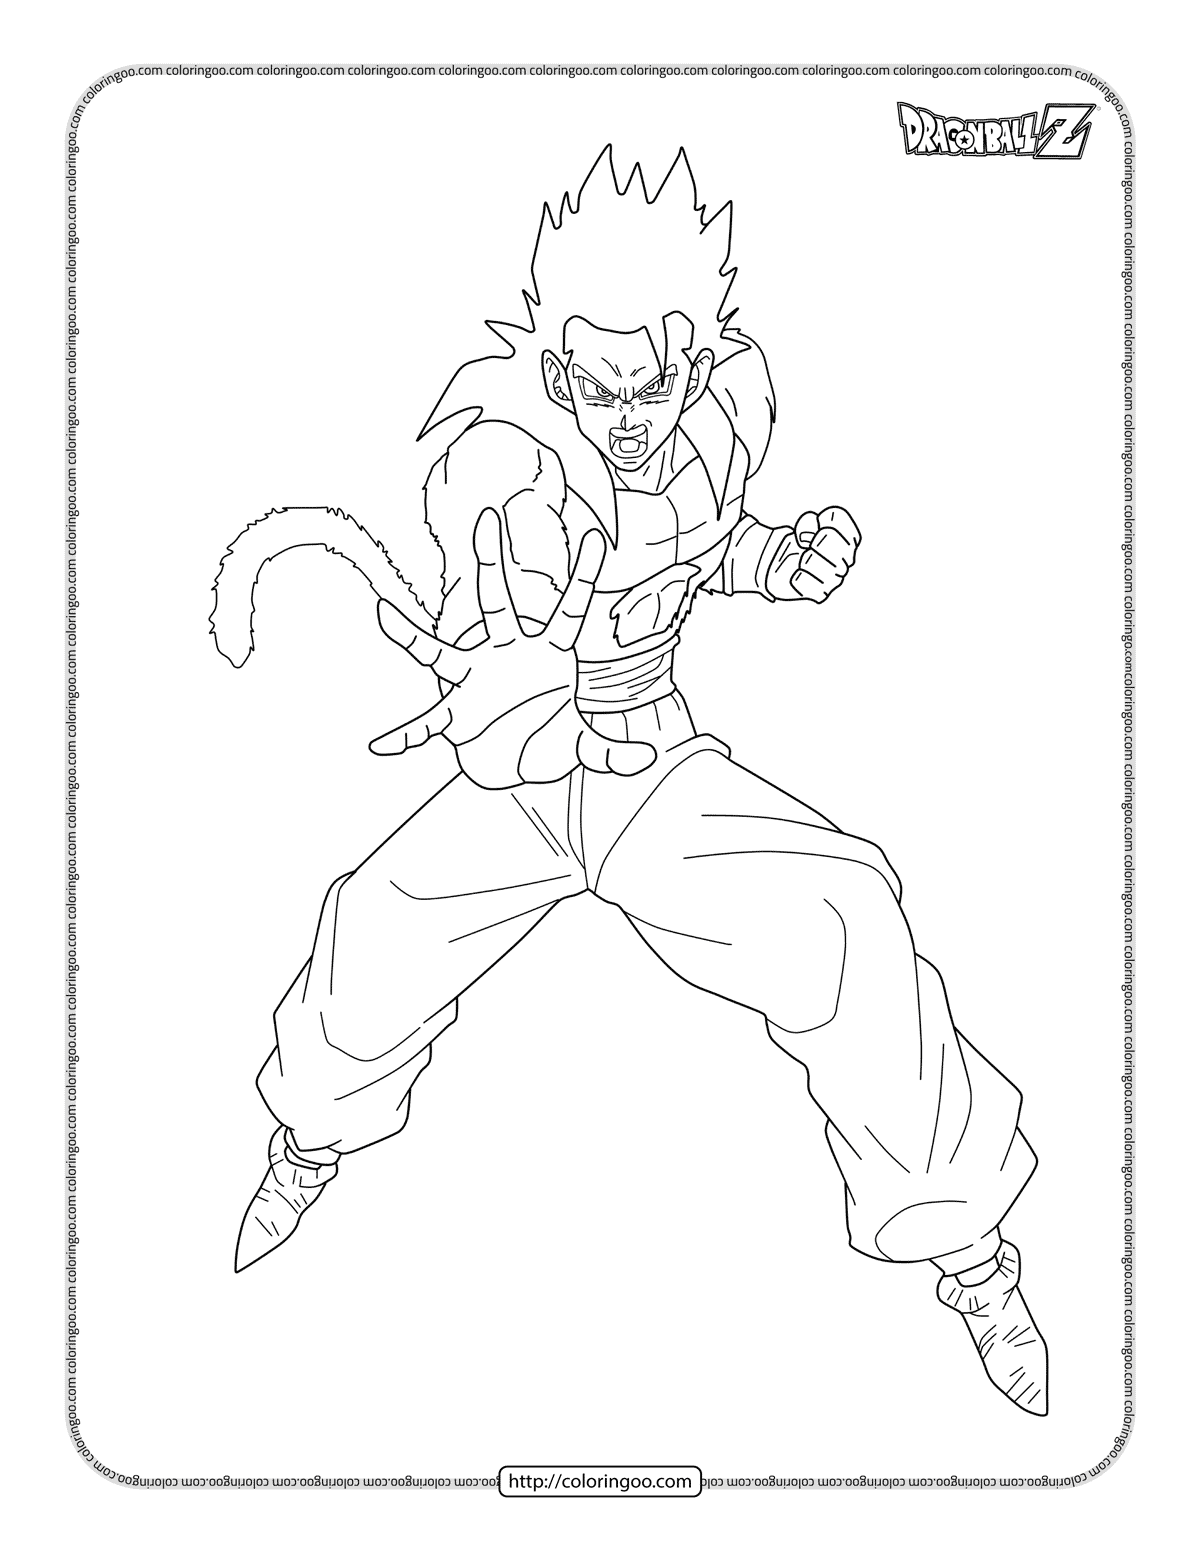 dragonball gohan coloring pages